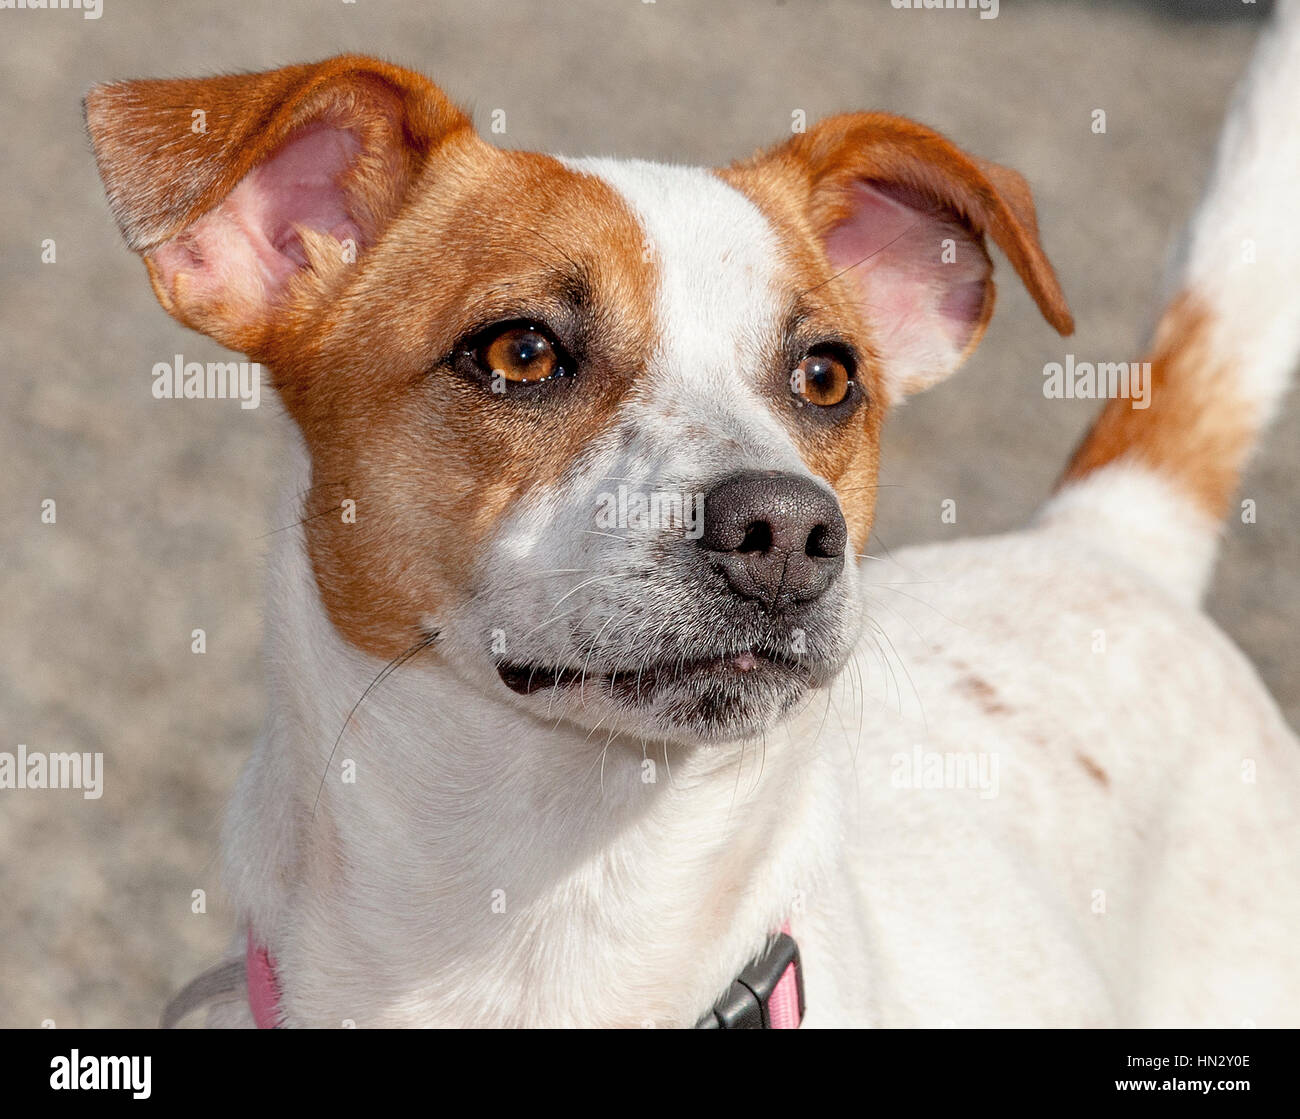 Adorable white and brown small dog headshot close up outside in the sun Stock Photo